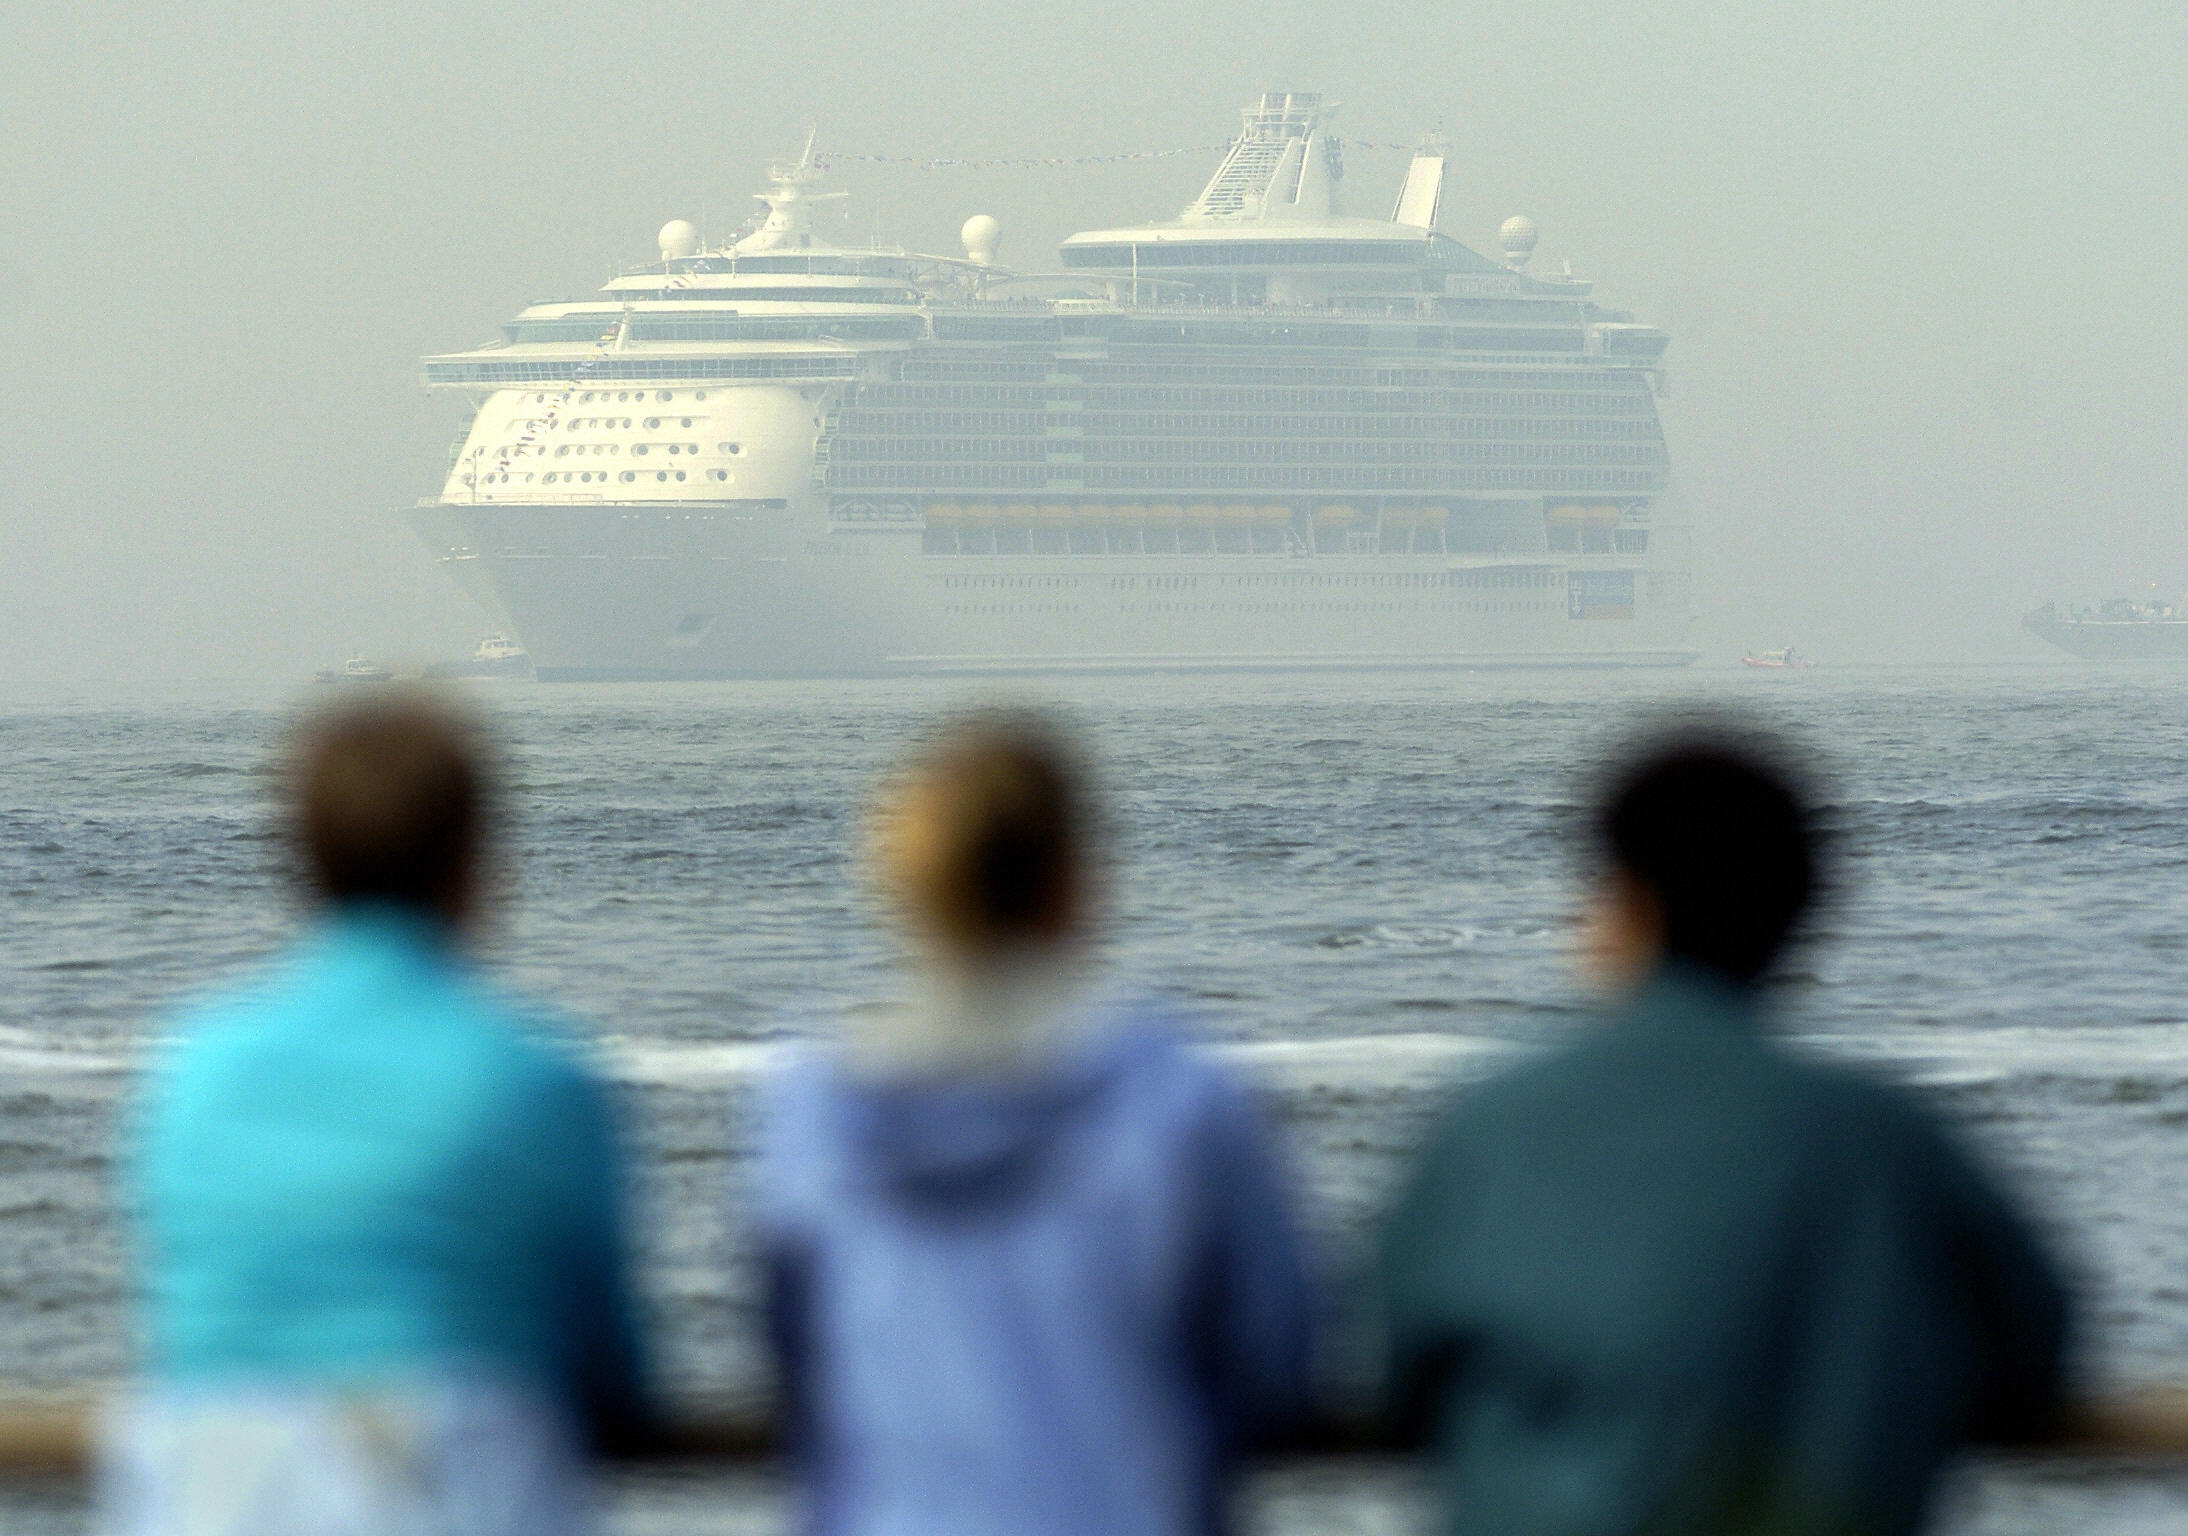 The Freedom of the Seas, owned by Royal Caribbean, sits at anchor May 12, 2006, as it  in New York harbor. (Stan Honda&mdash;AFP/Getty Images)